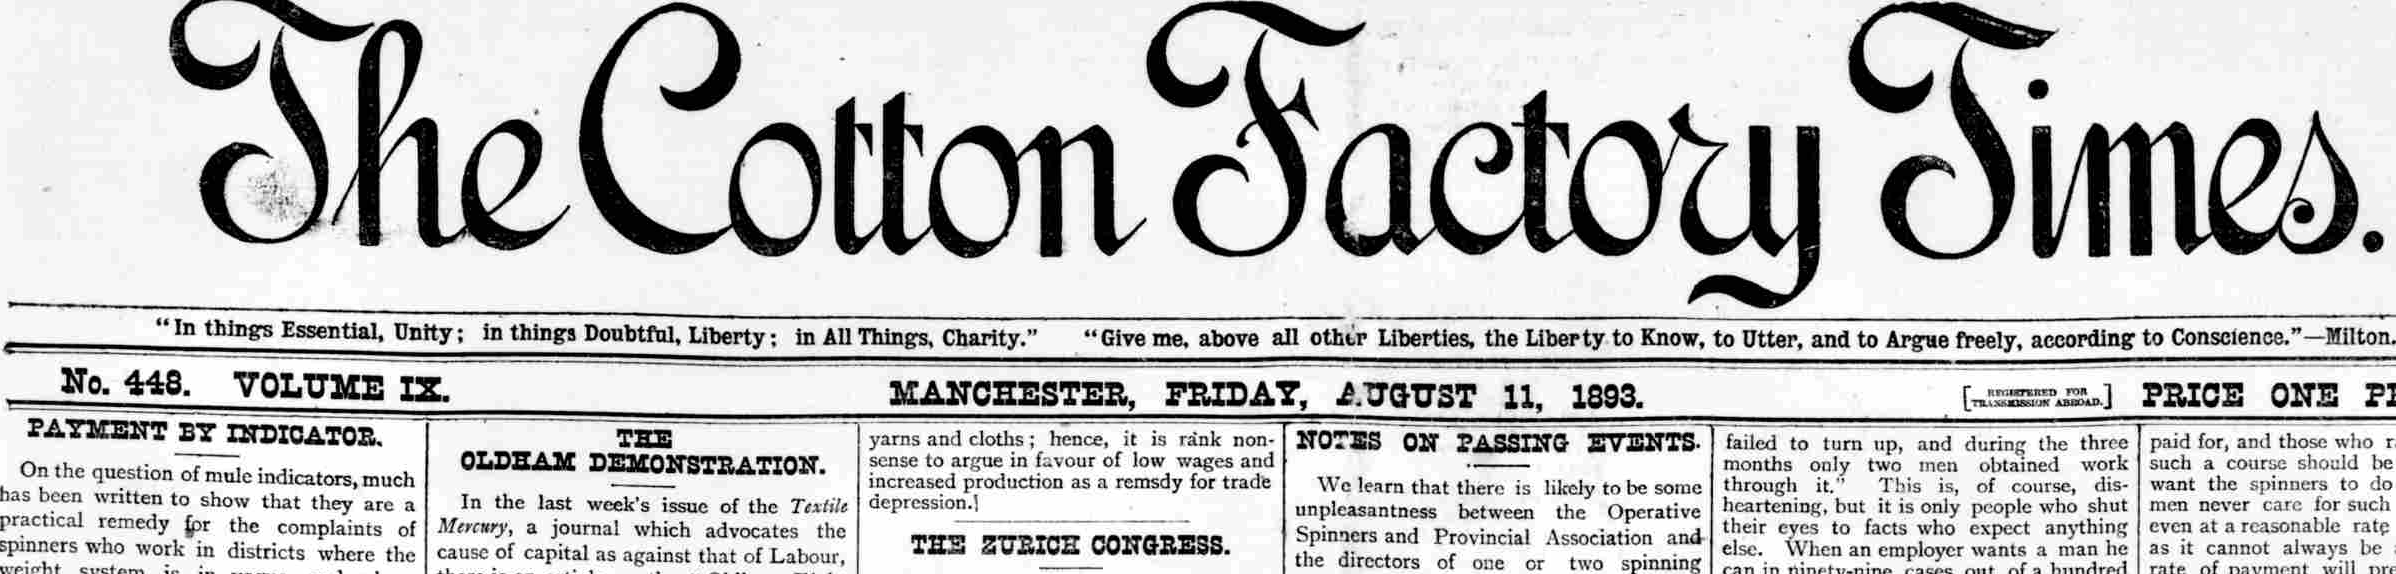 Masthead from the Cotton Factory Times